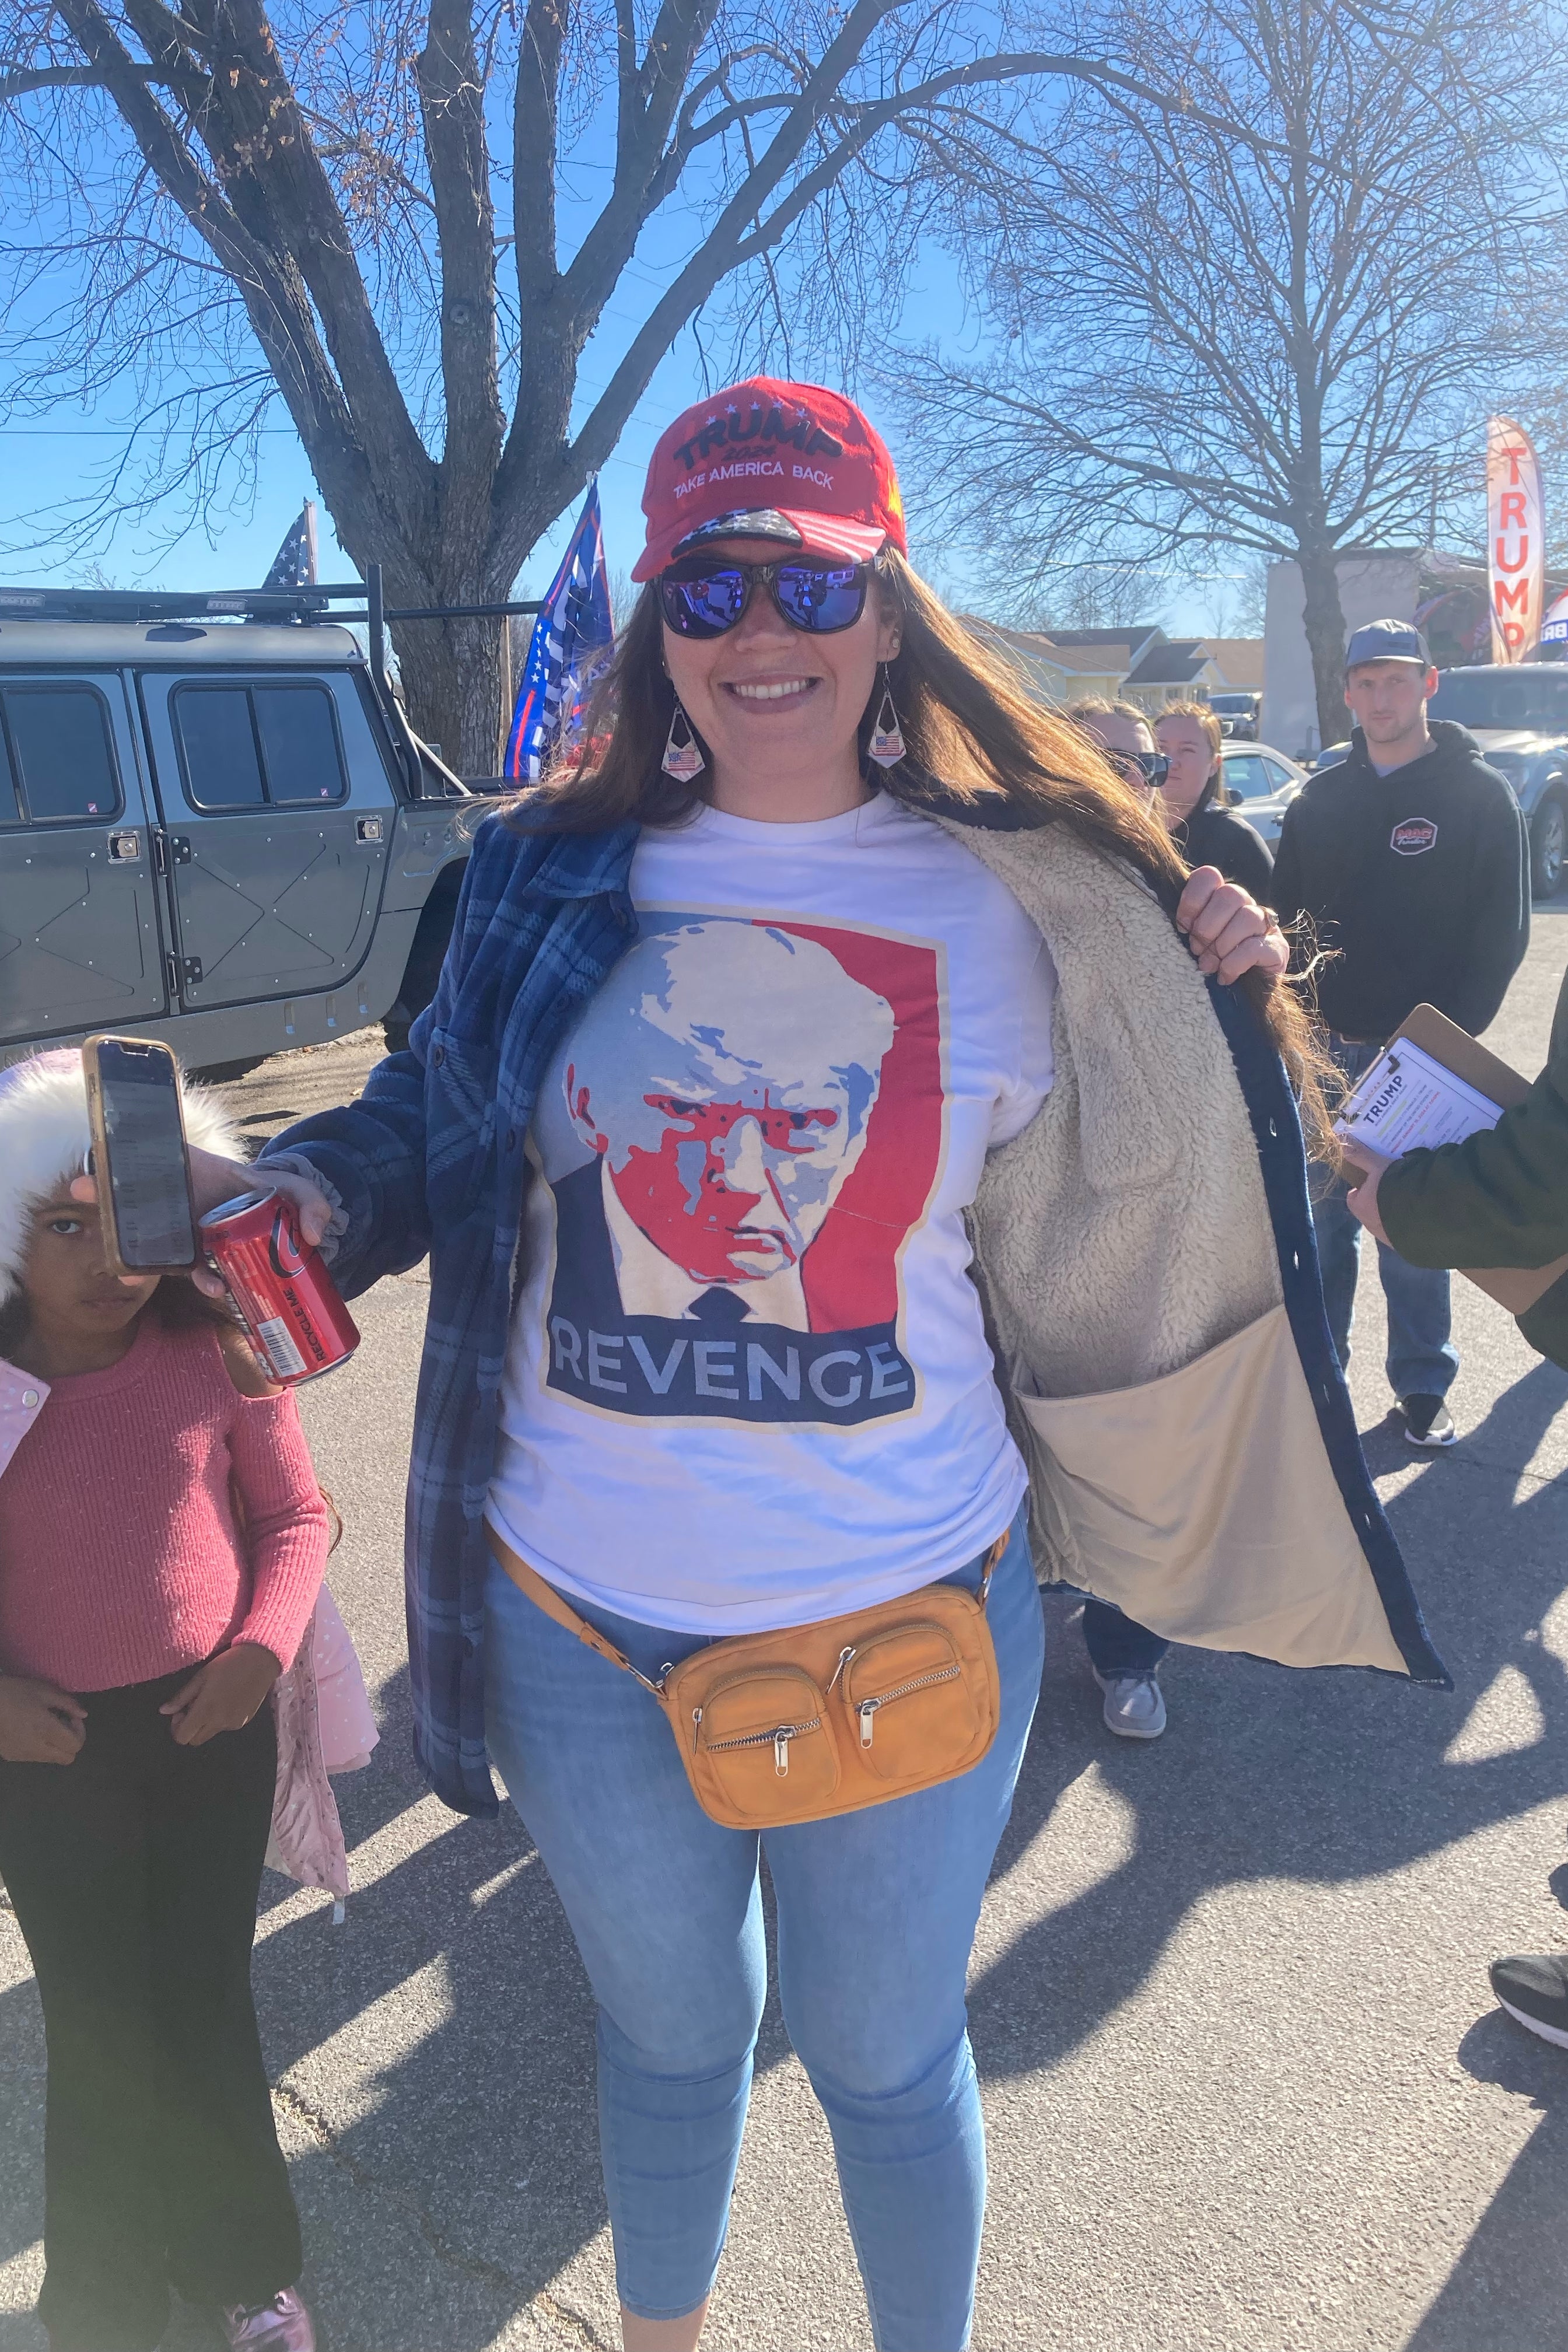 A woman wears a T-shirt that says, "Revenge" and features a photo of Trump in the style of Shepard Fairey's Obama "Hope" poster.